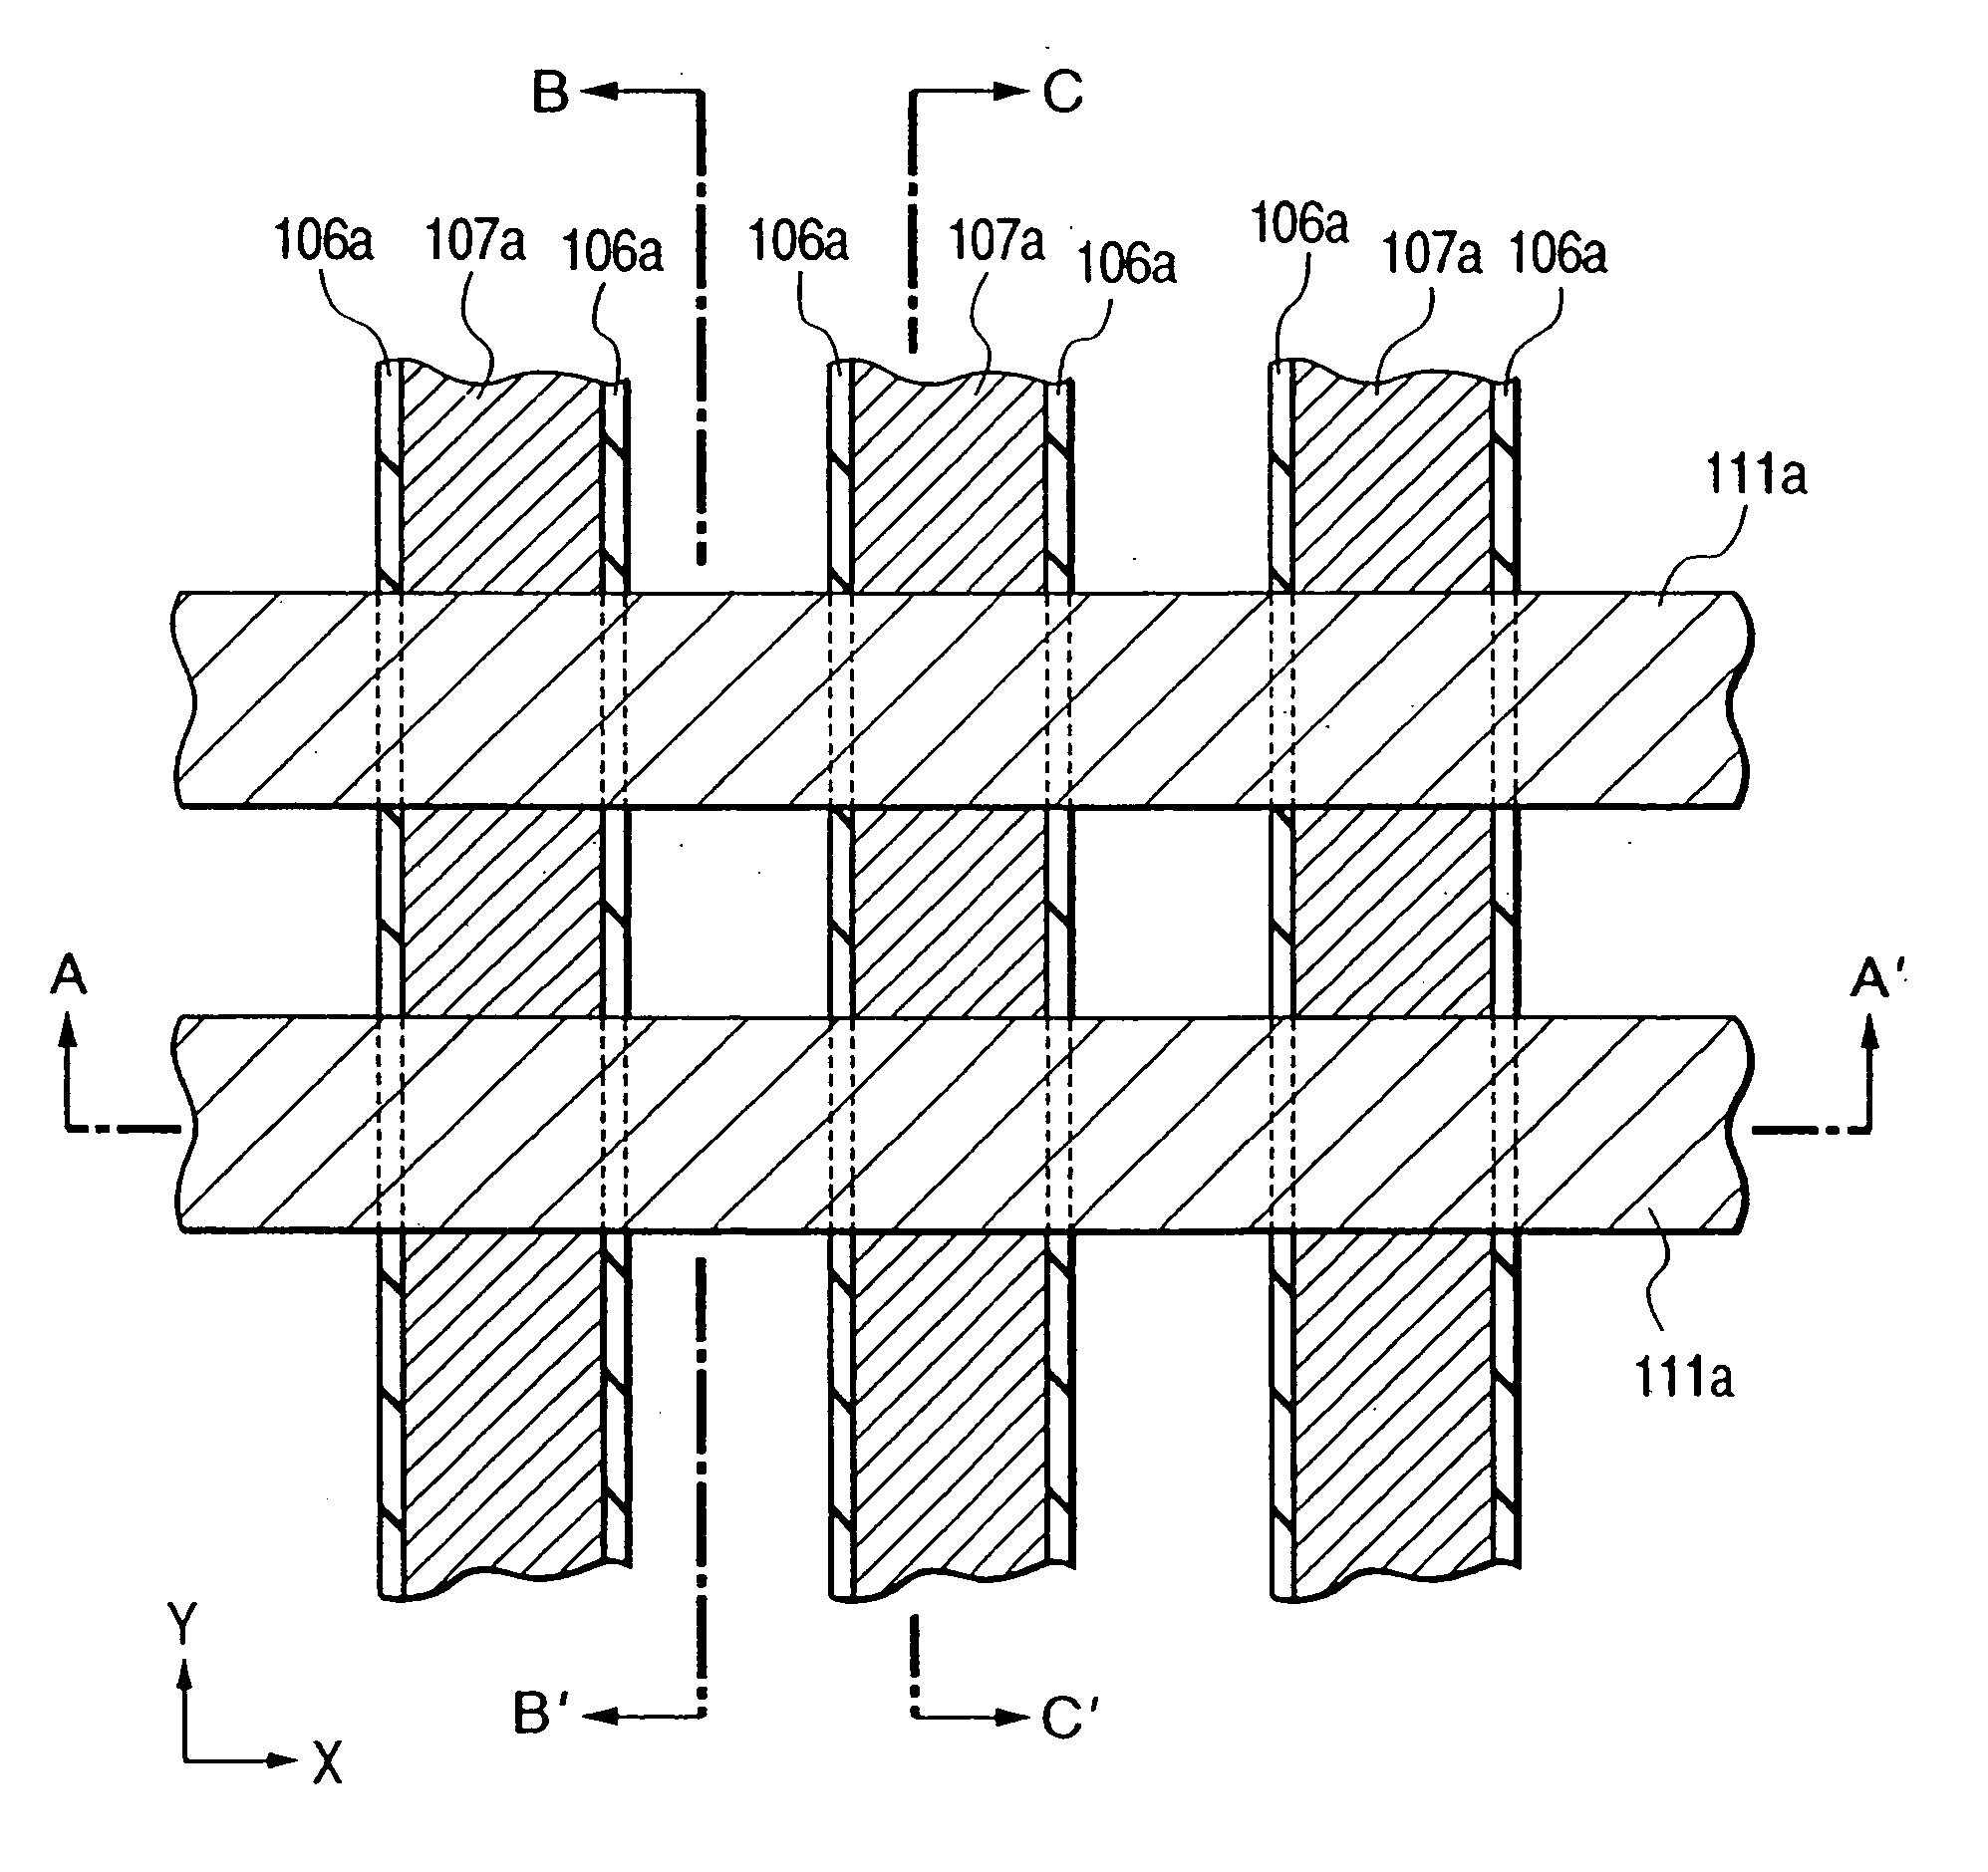 Semiconductor integrated circuit device including first, second and third gates